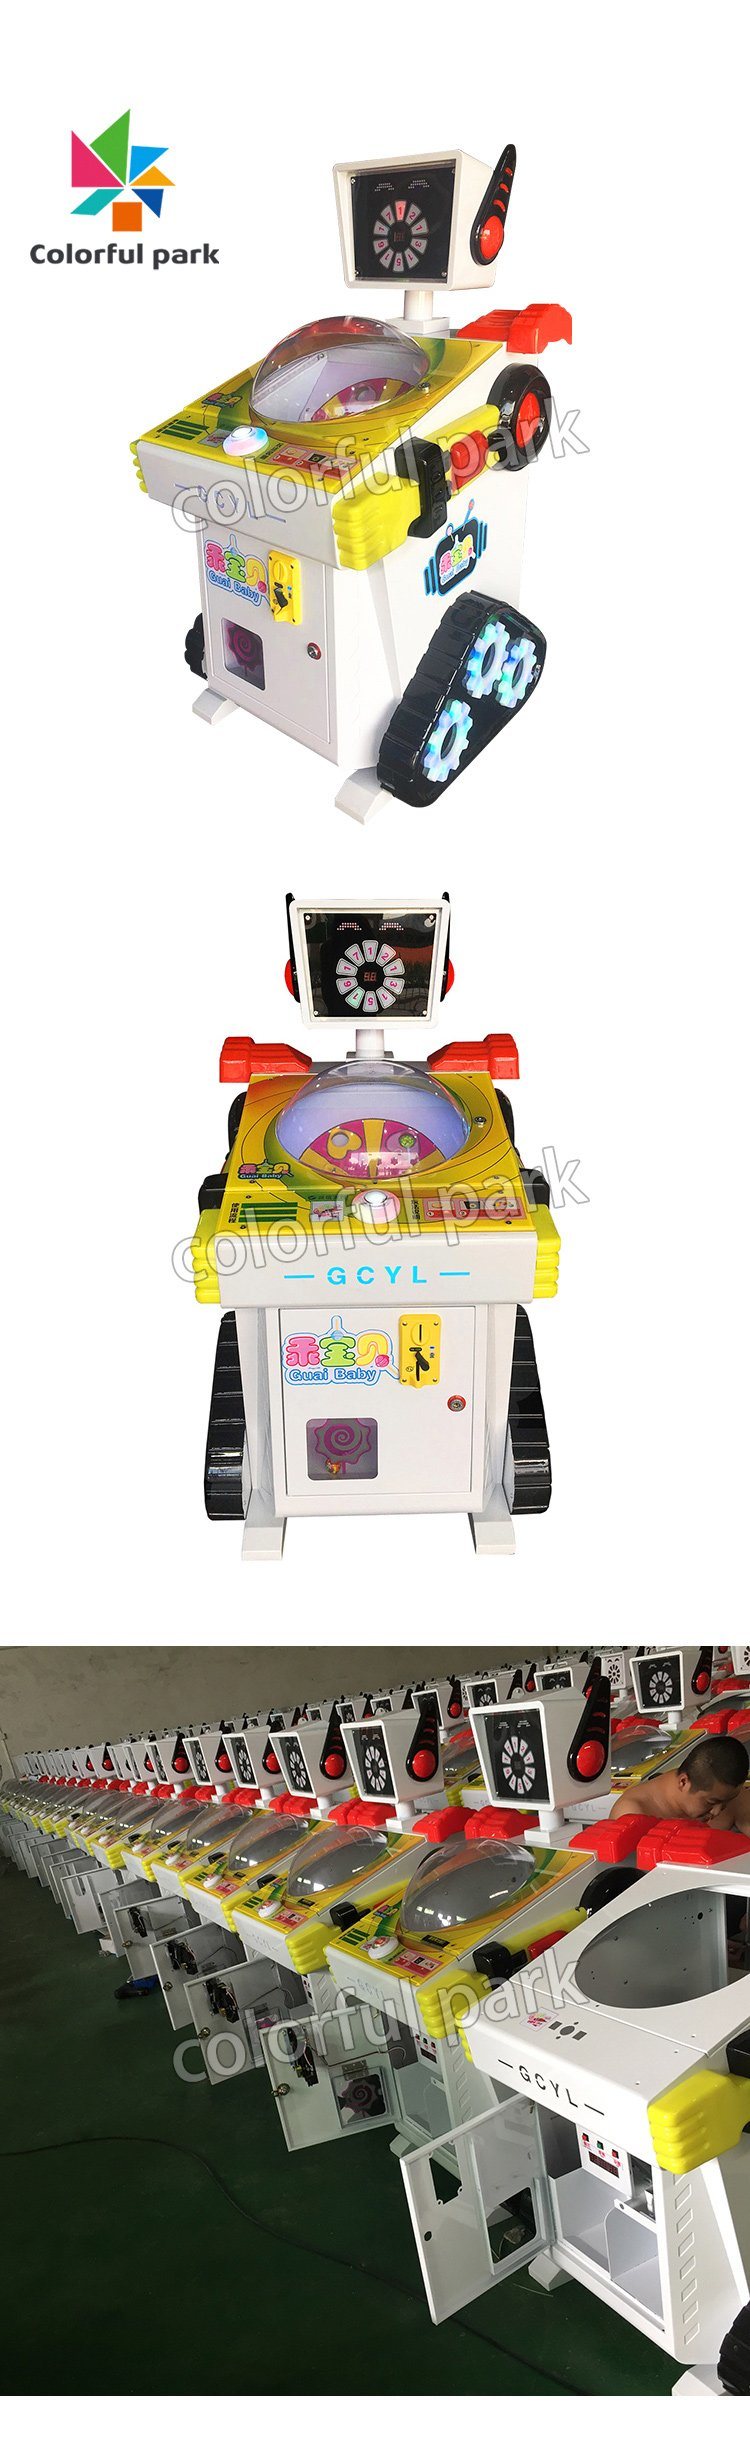 Colorful Park Coin Operated Candy Kiddie Ticket Redemption Prize Claw Arcade Machine